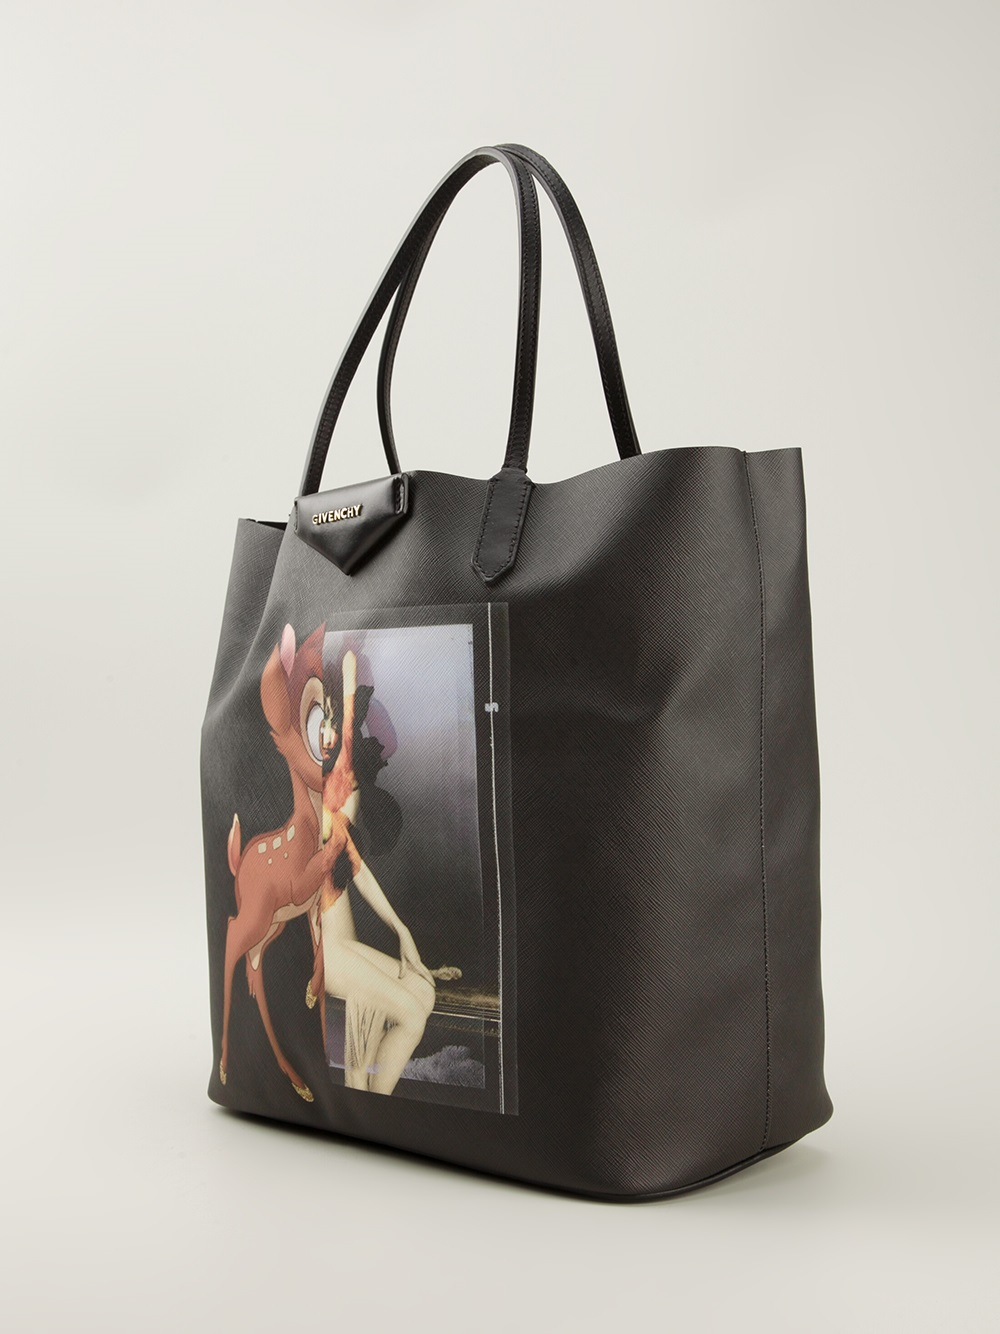 Givenchy Bambi Coated-Canvas Tote in Black - Lyst